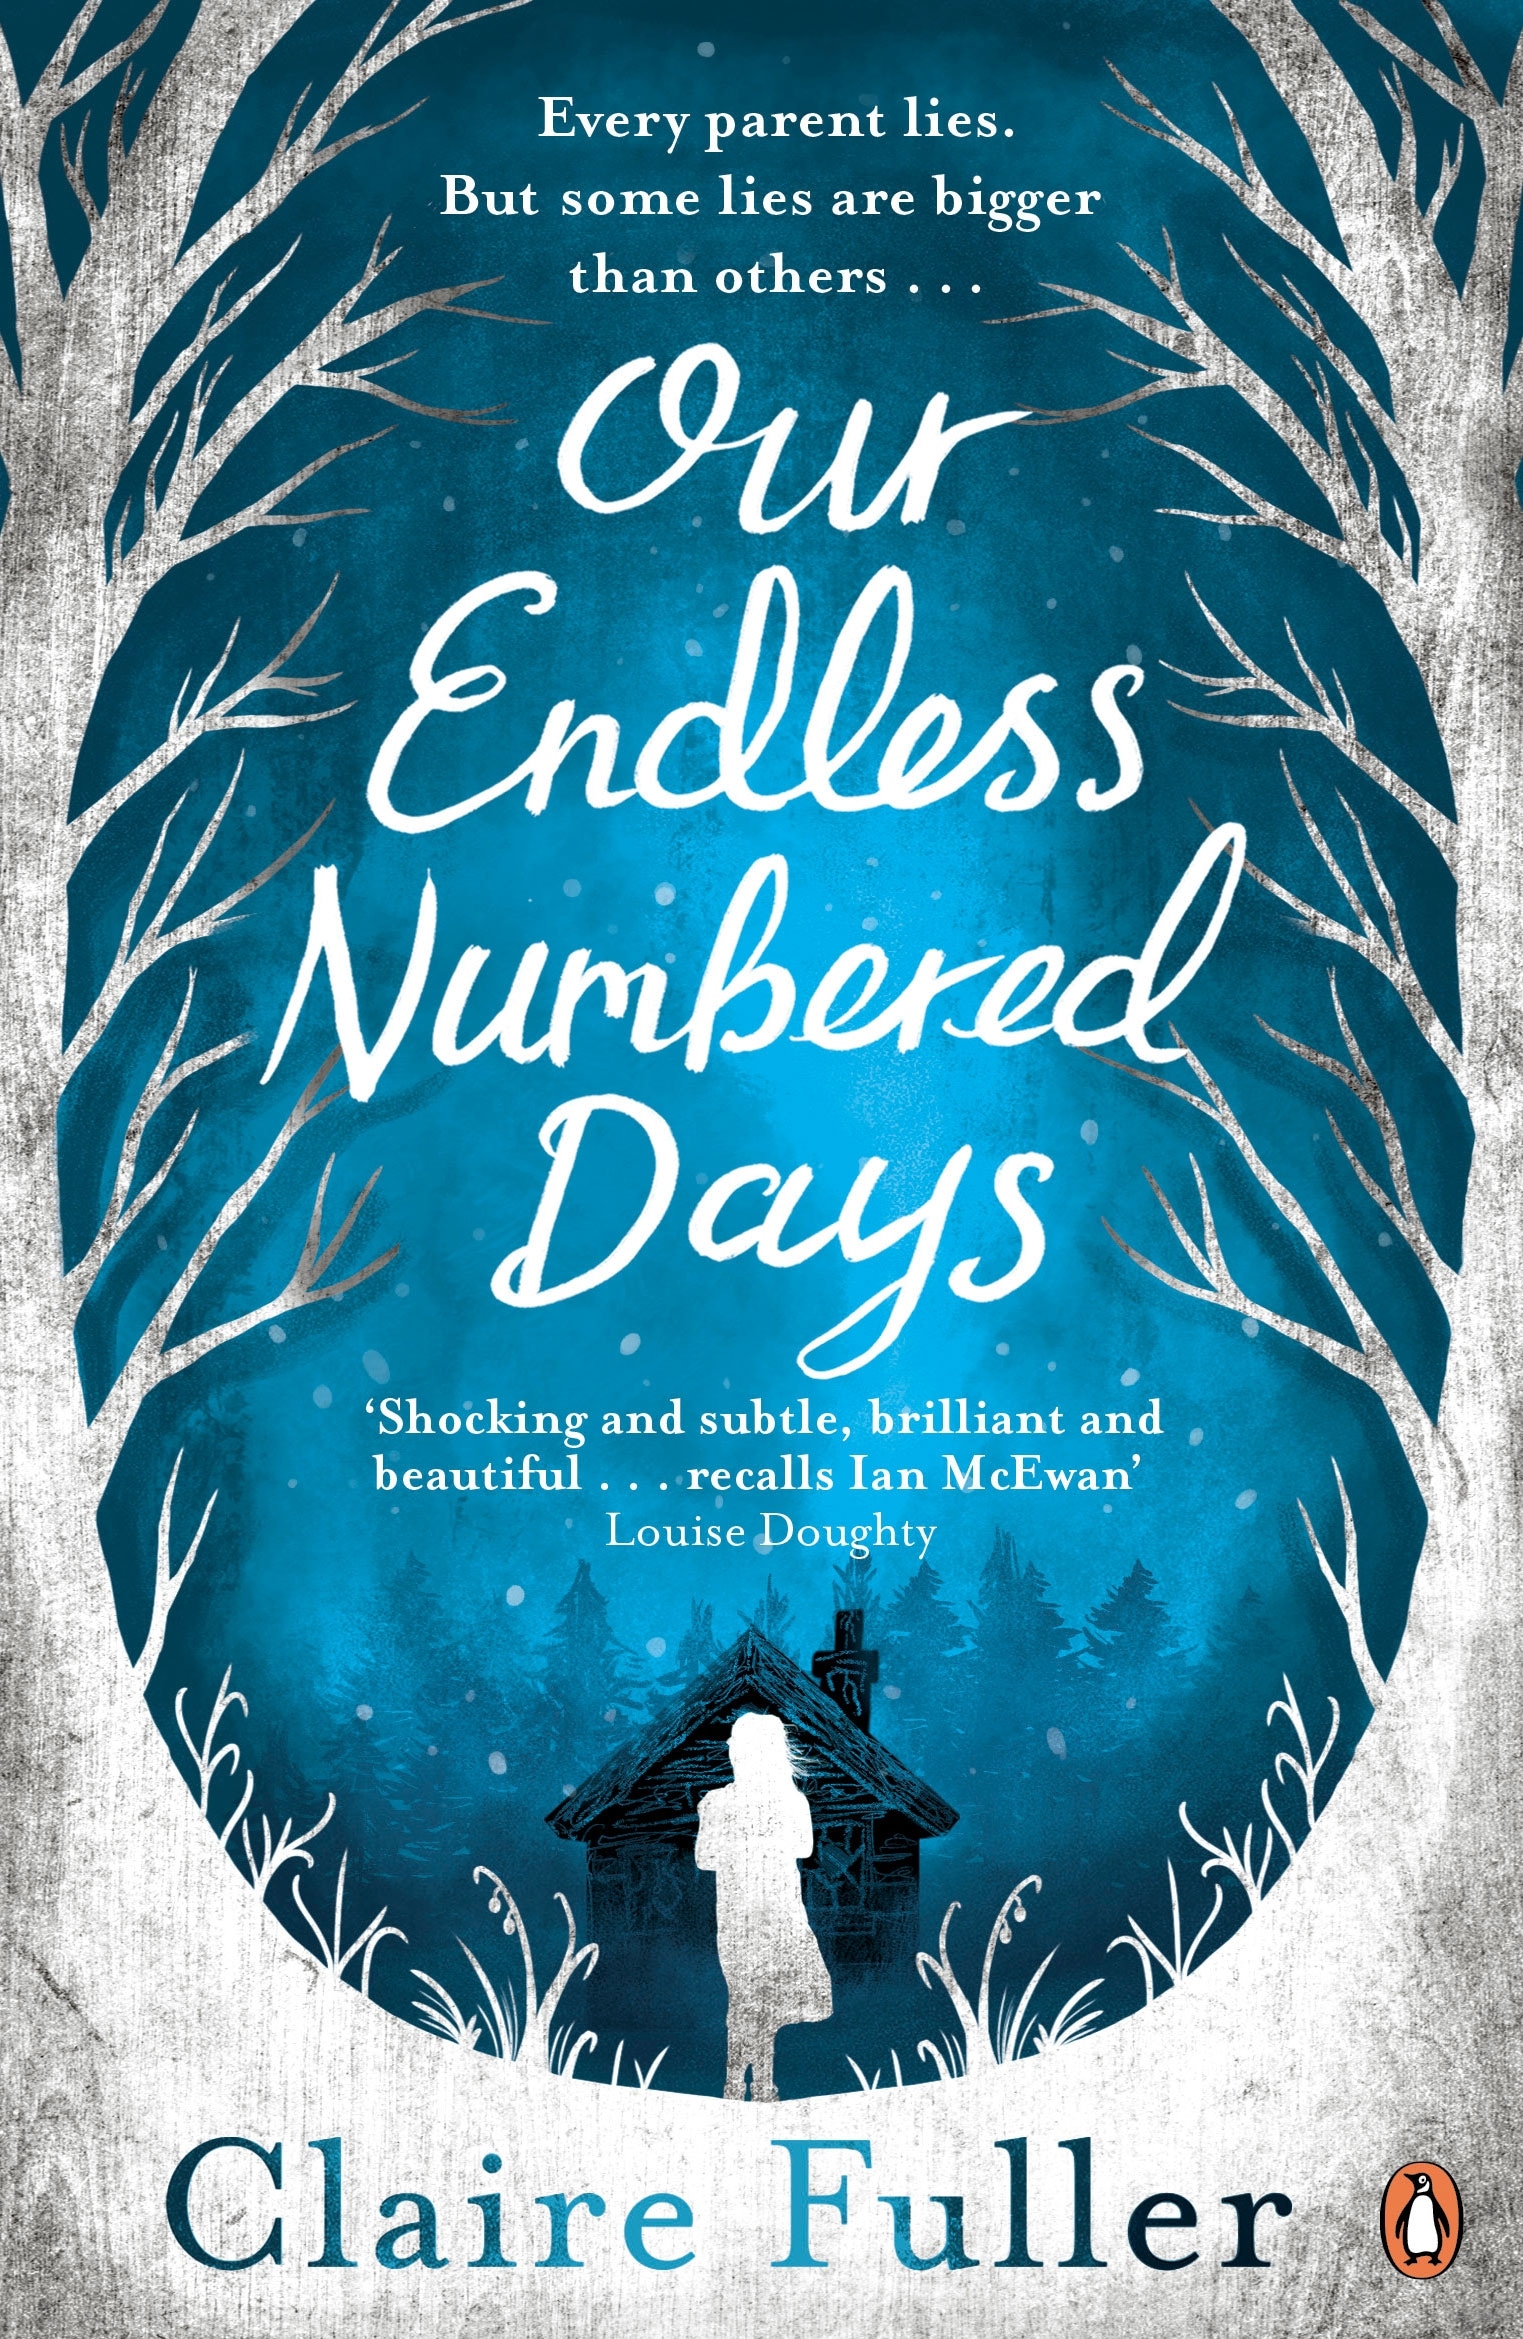 Book “Our Endless Numbered Days” by Claire Fuller — December 31, 2015